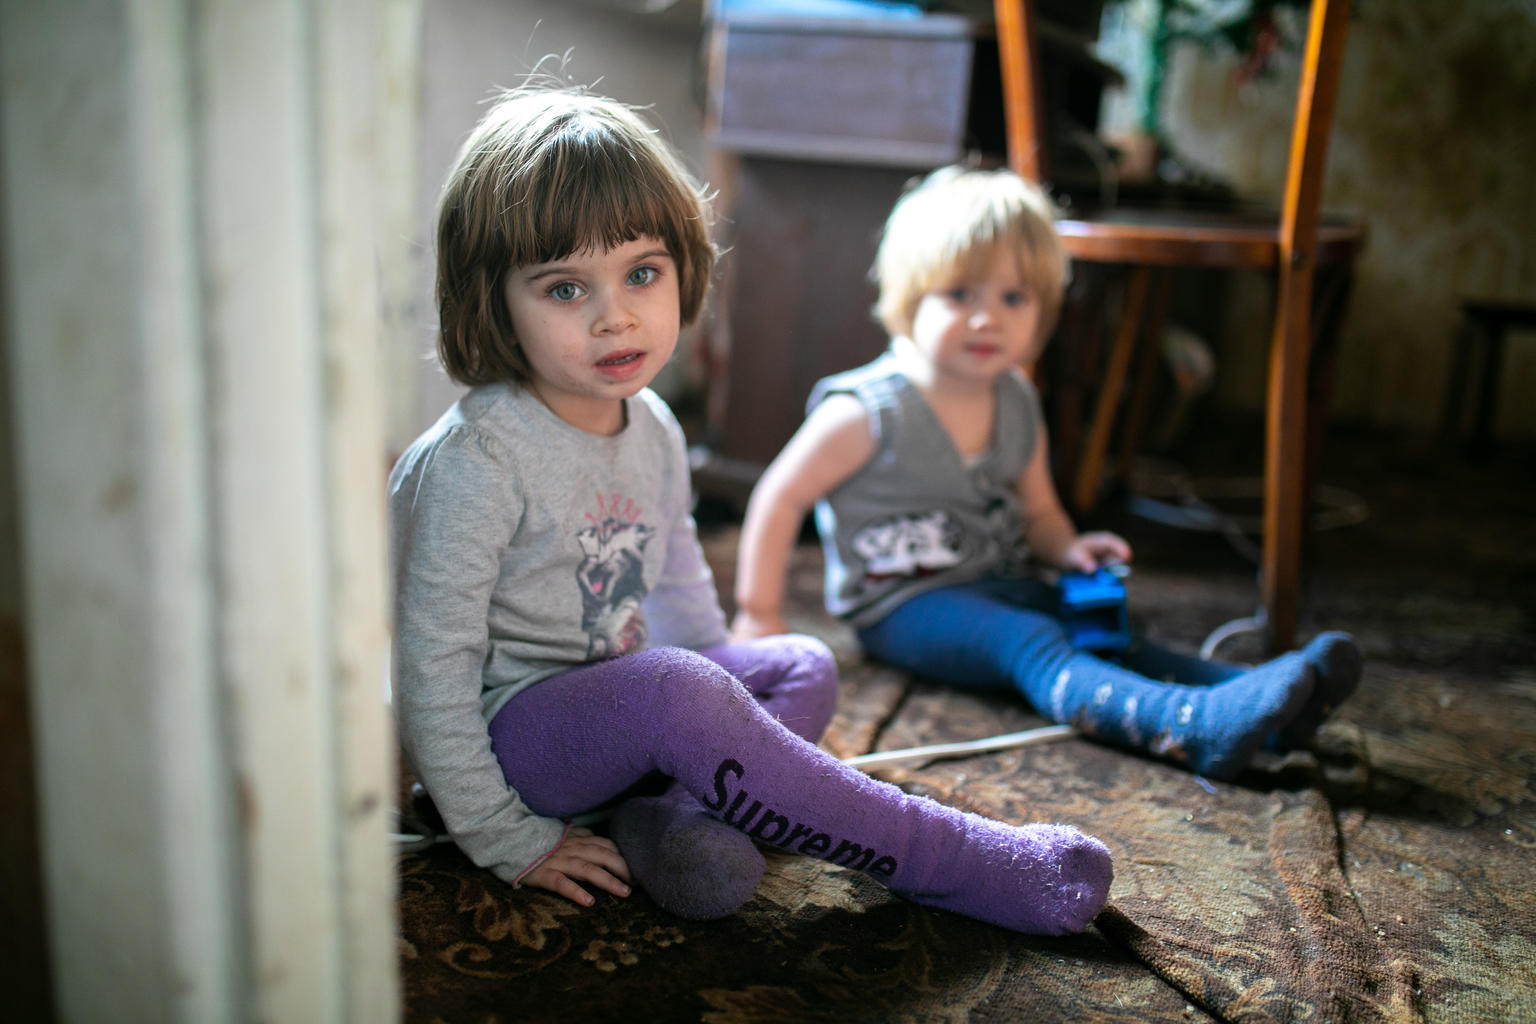 Liza 3 y.o. plays with his younger brother in their home in Krasnohorivka, which is close to the front line.